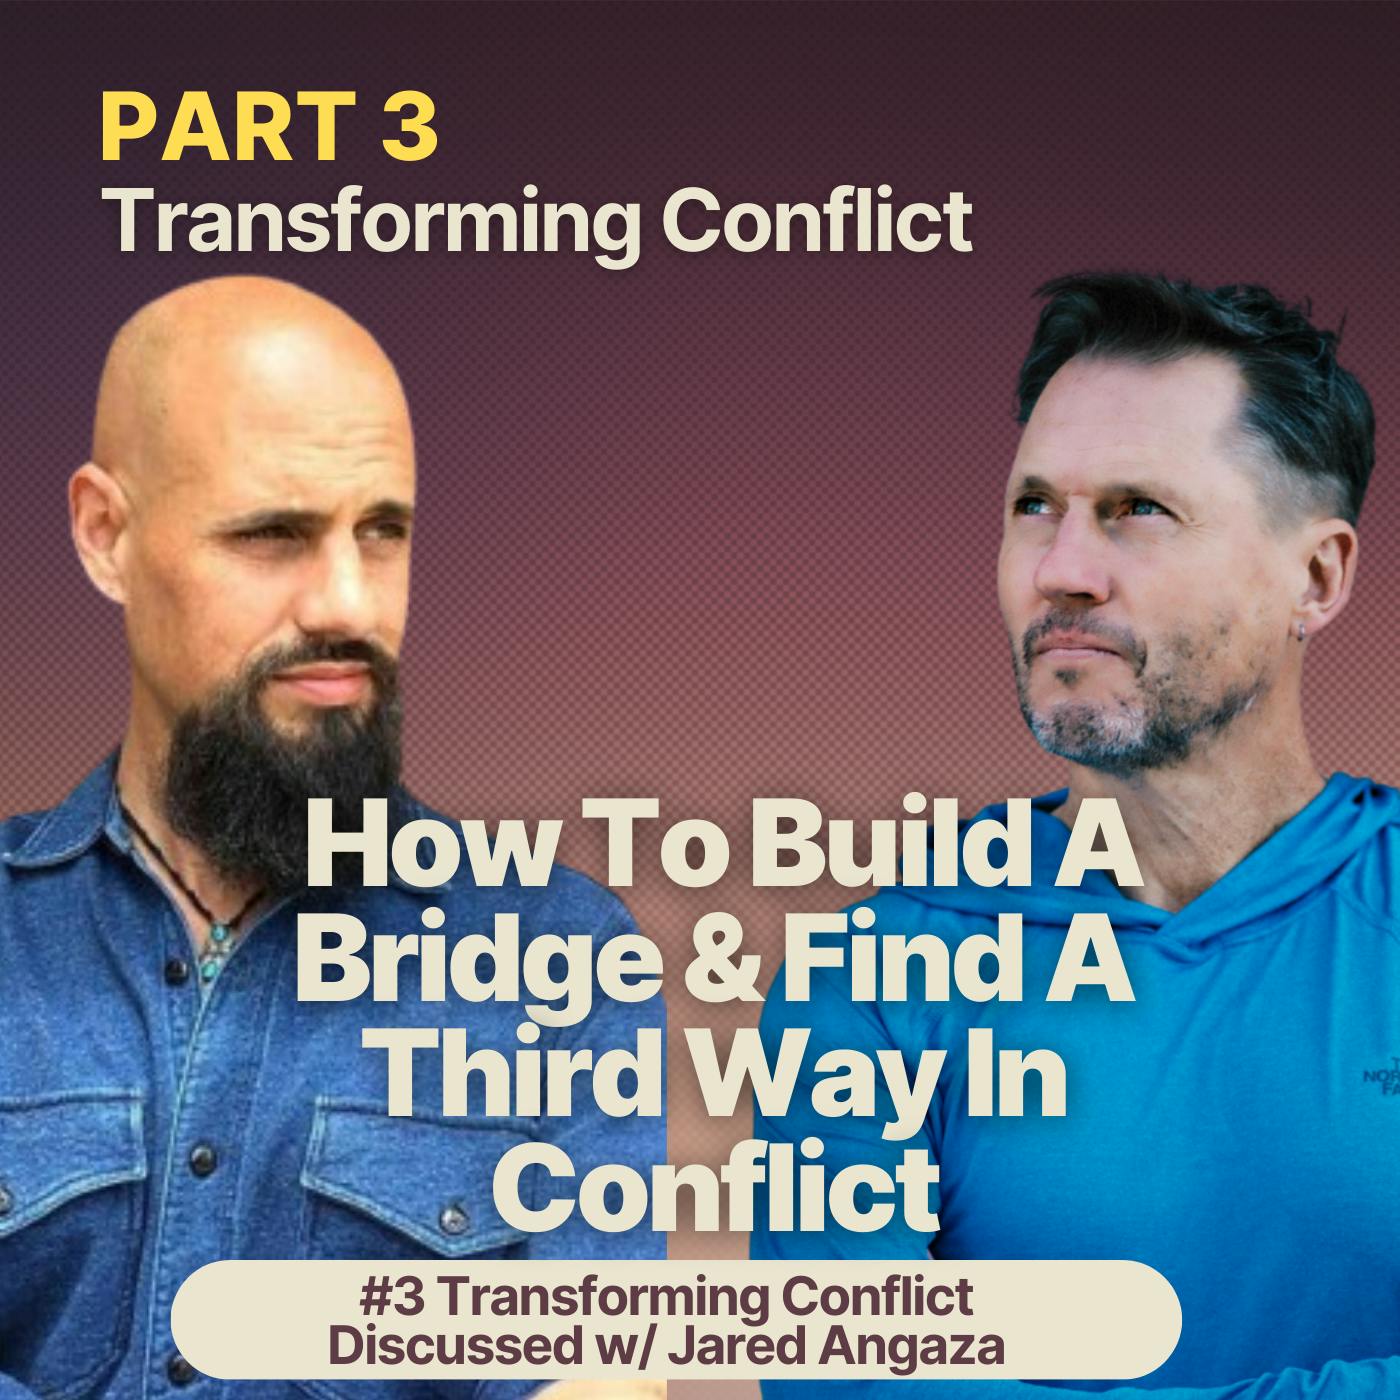 Transforming Conflict | How To Build A Bridge & Find A Third Way In Conflict